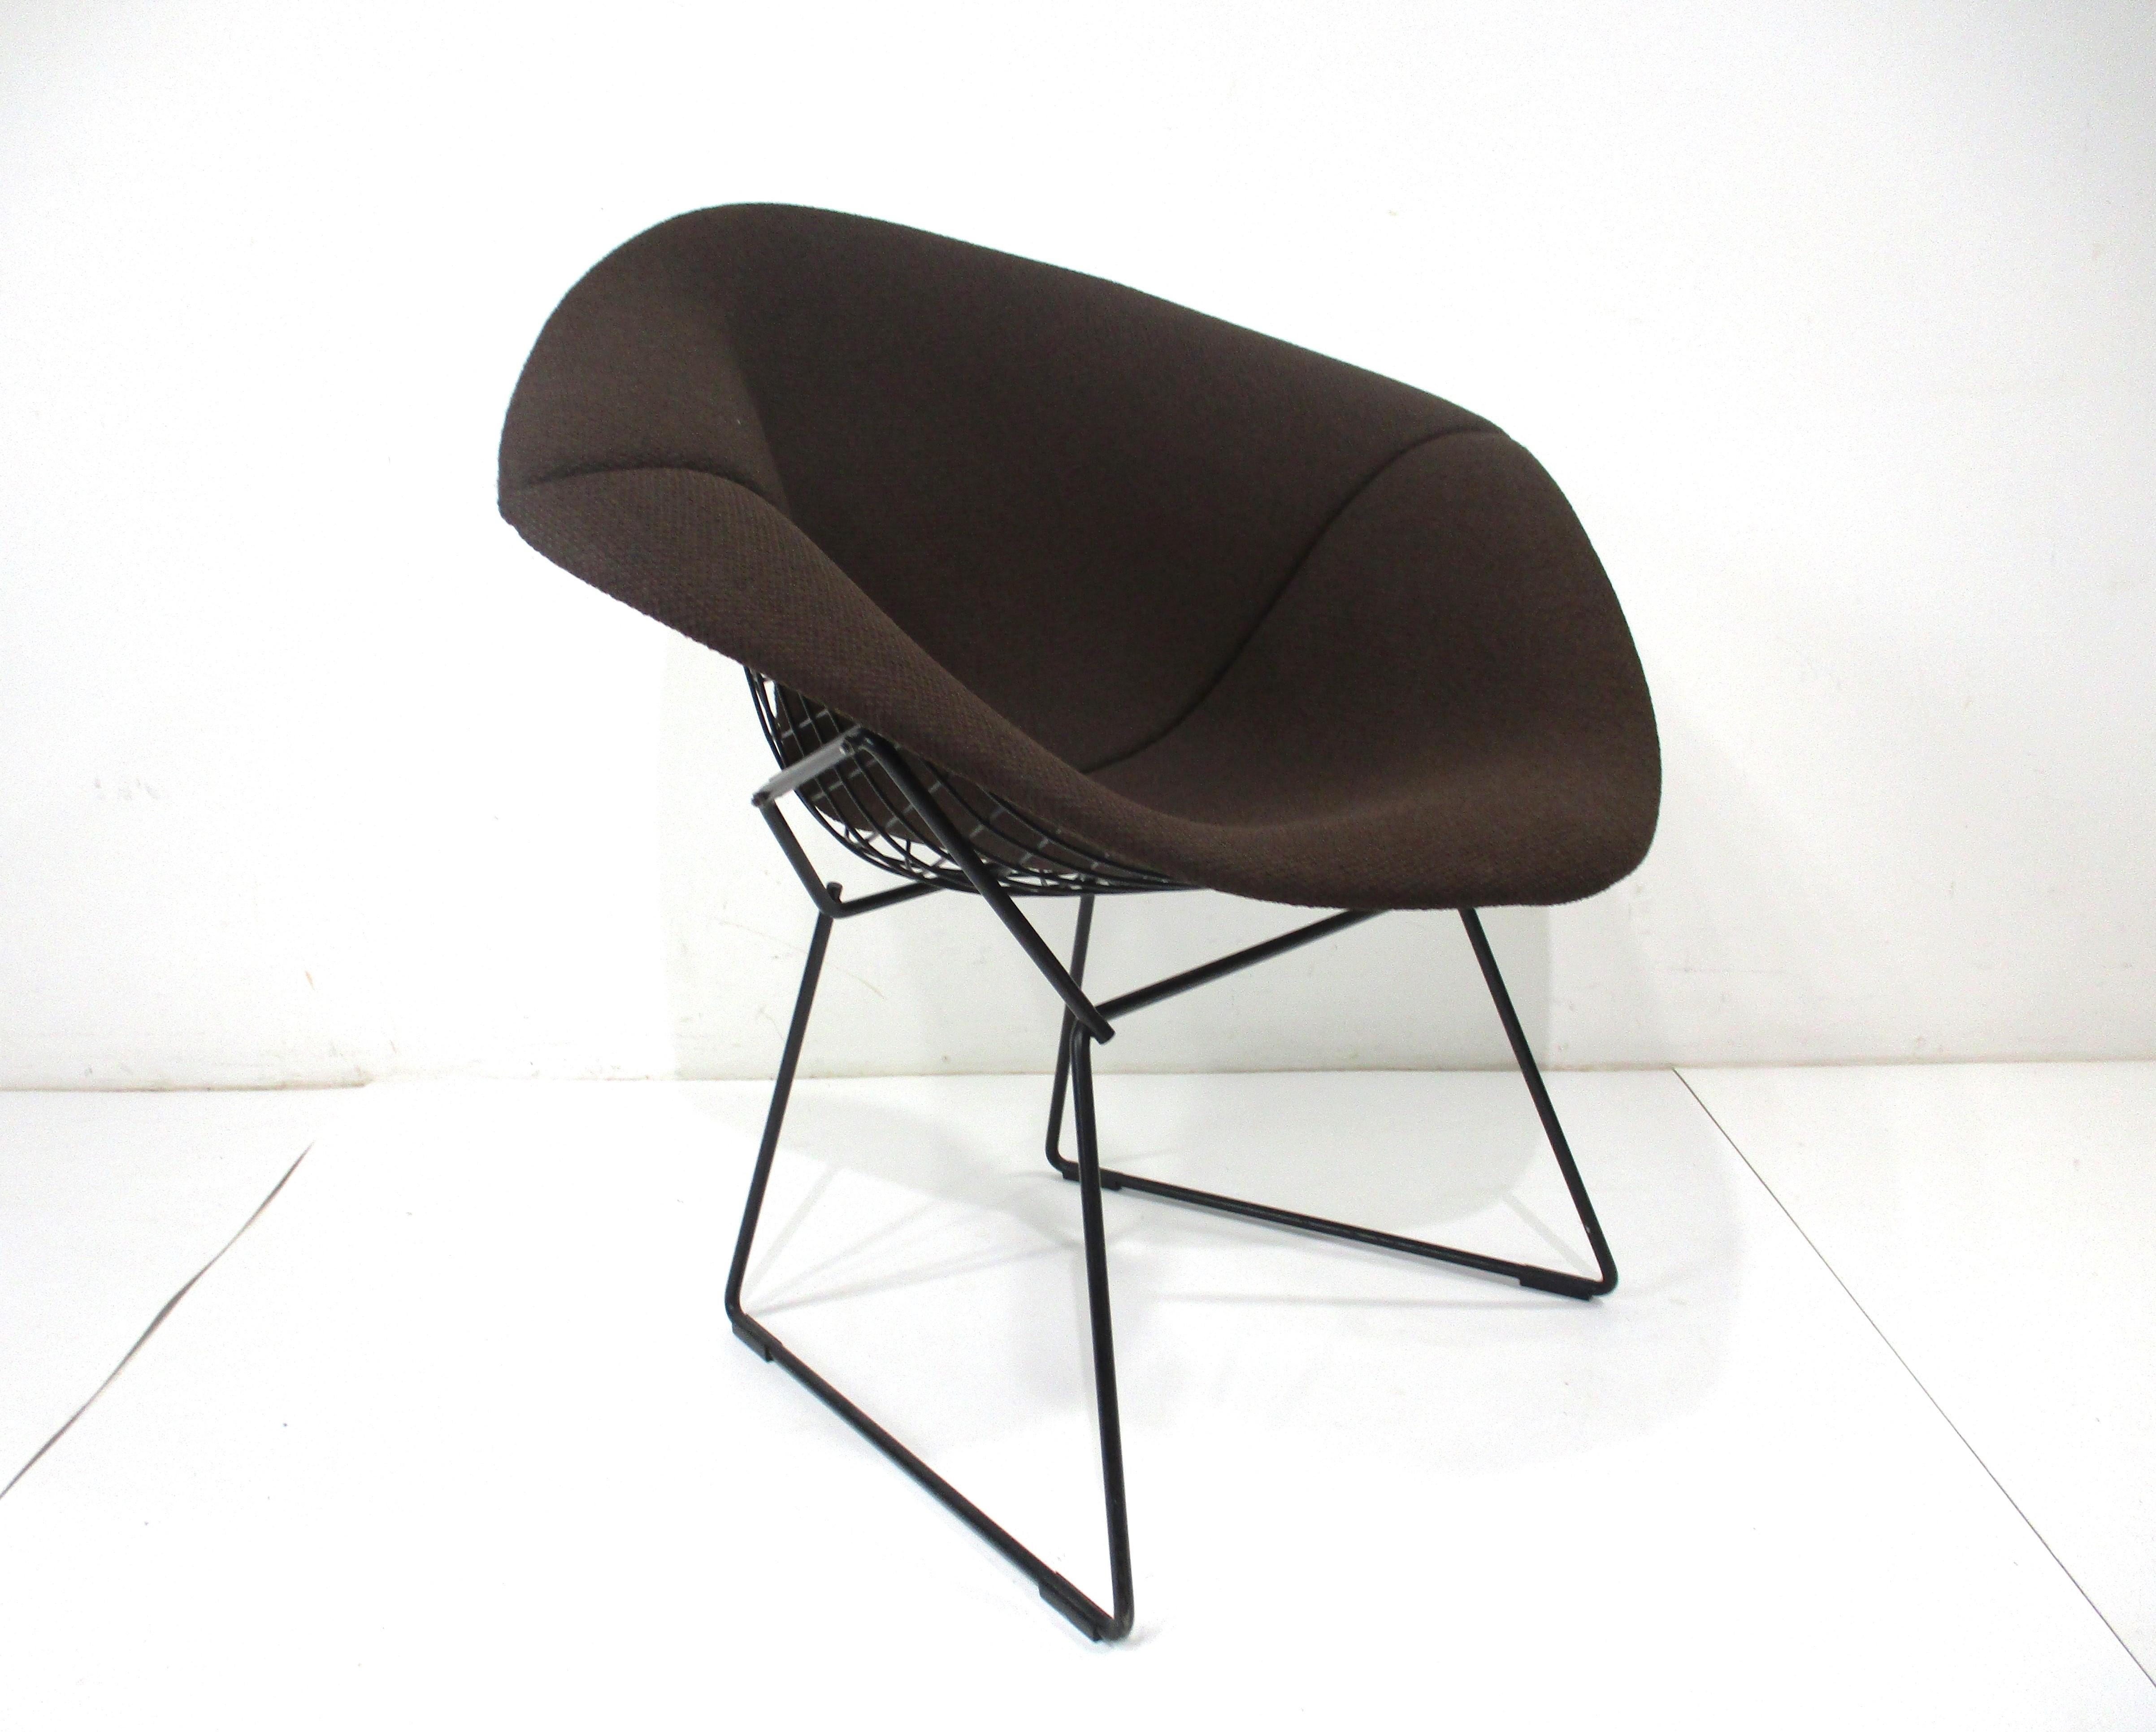 A very nice black wire framed small diamond lounge chair with matching black base . Having a full upholstered cover in a chocolate tone with soft woven fabric making the chair a very cozy place to sit for long periods . Manufactured by Knoll and